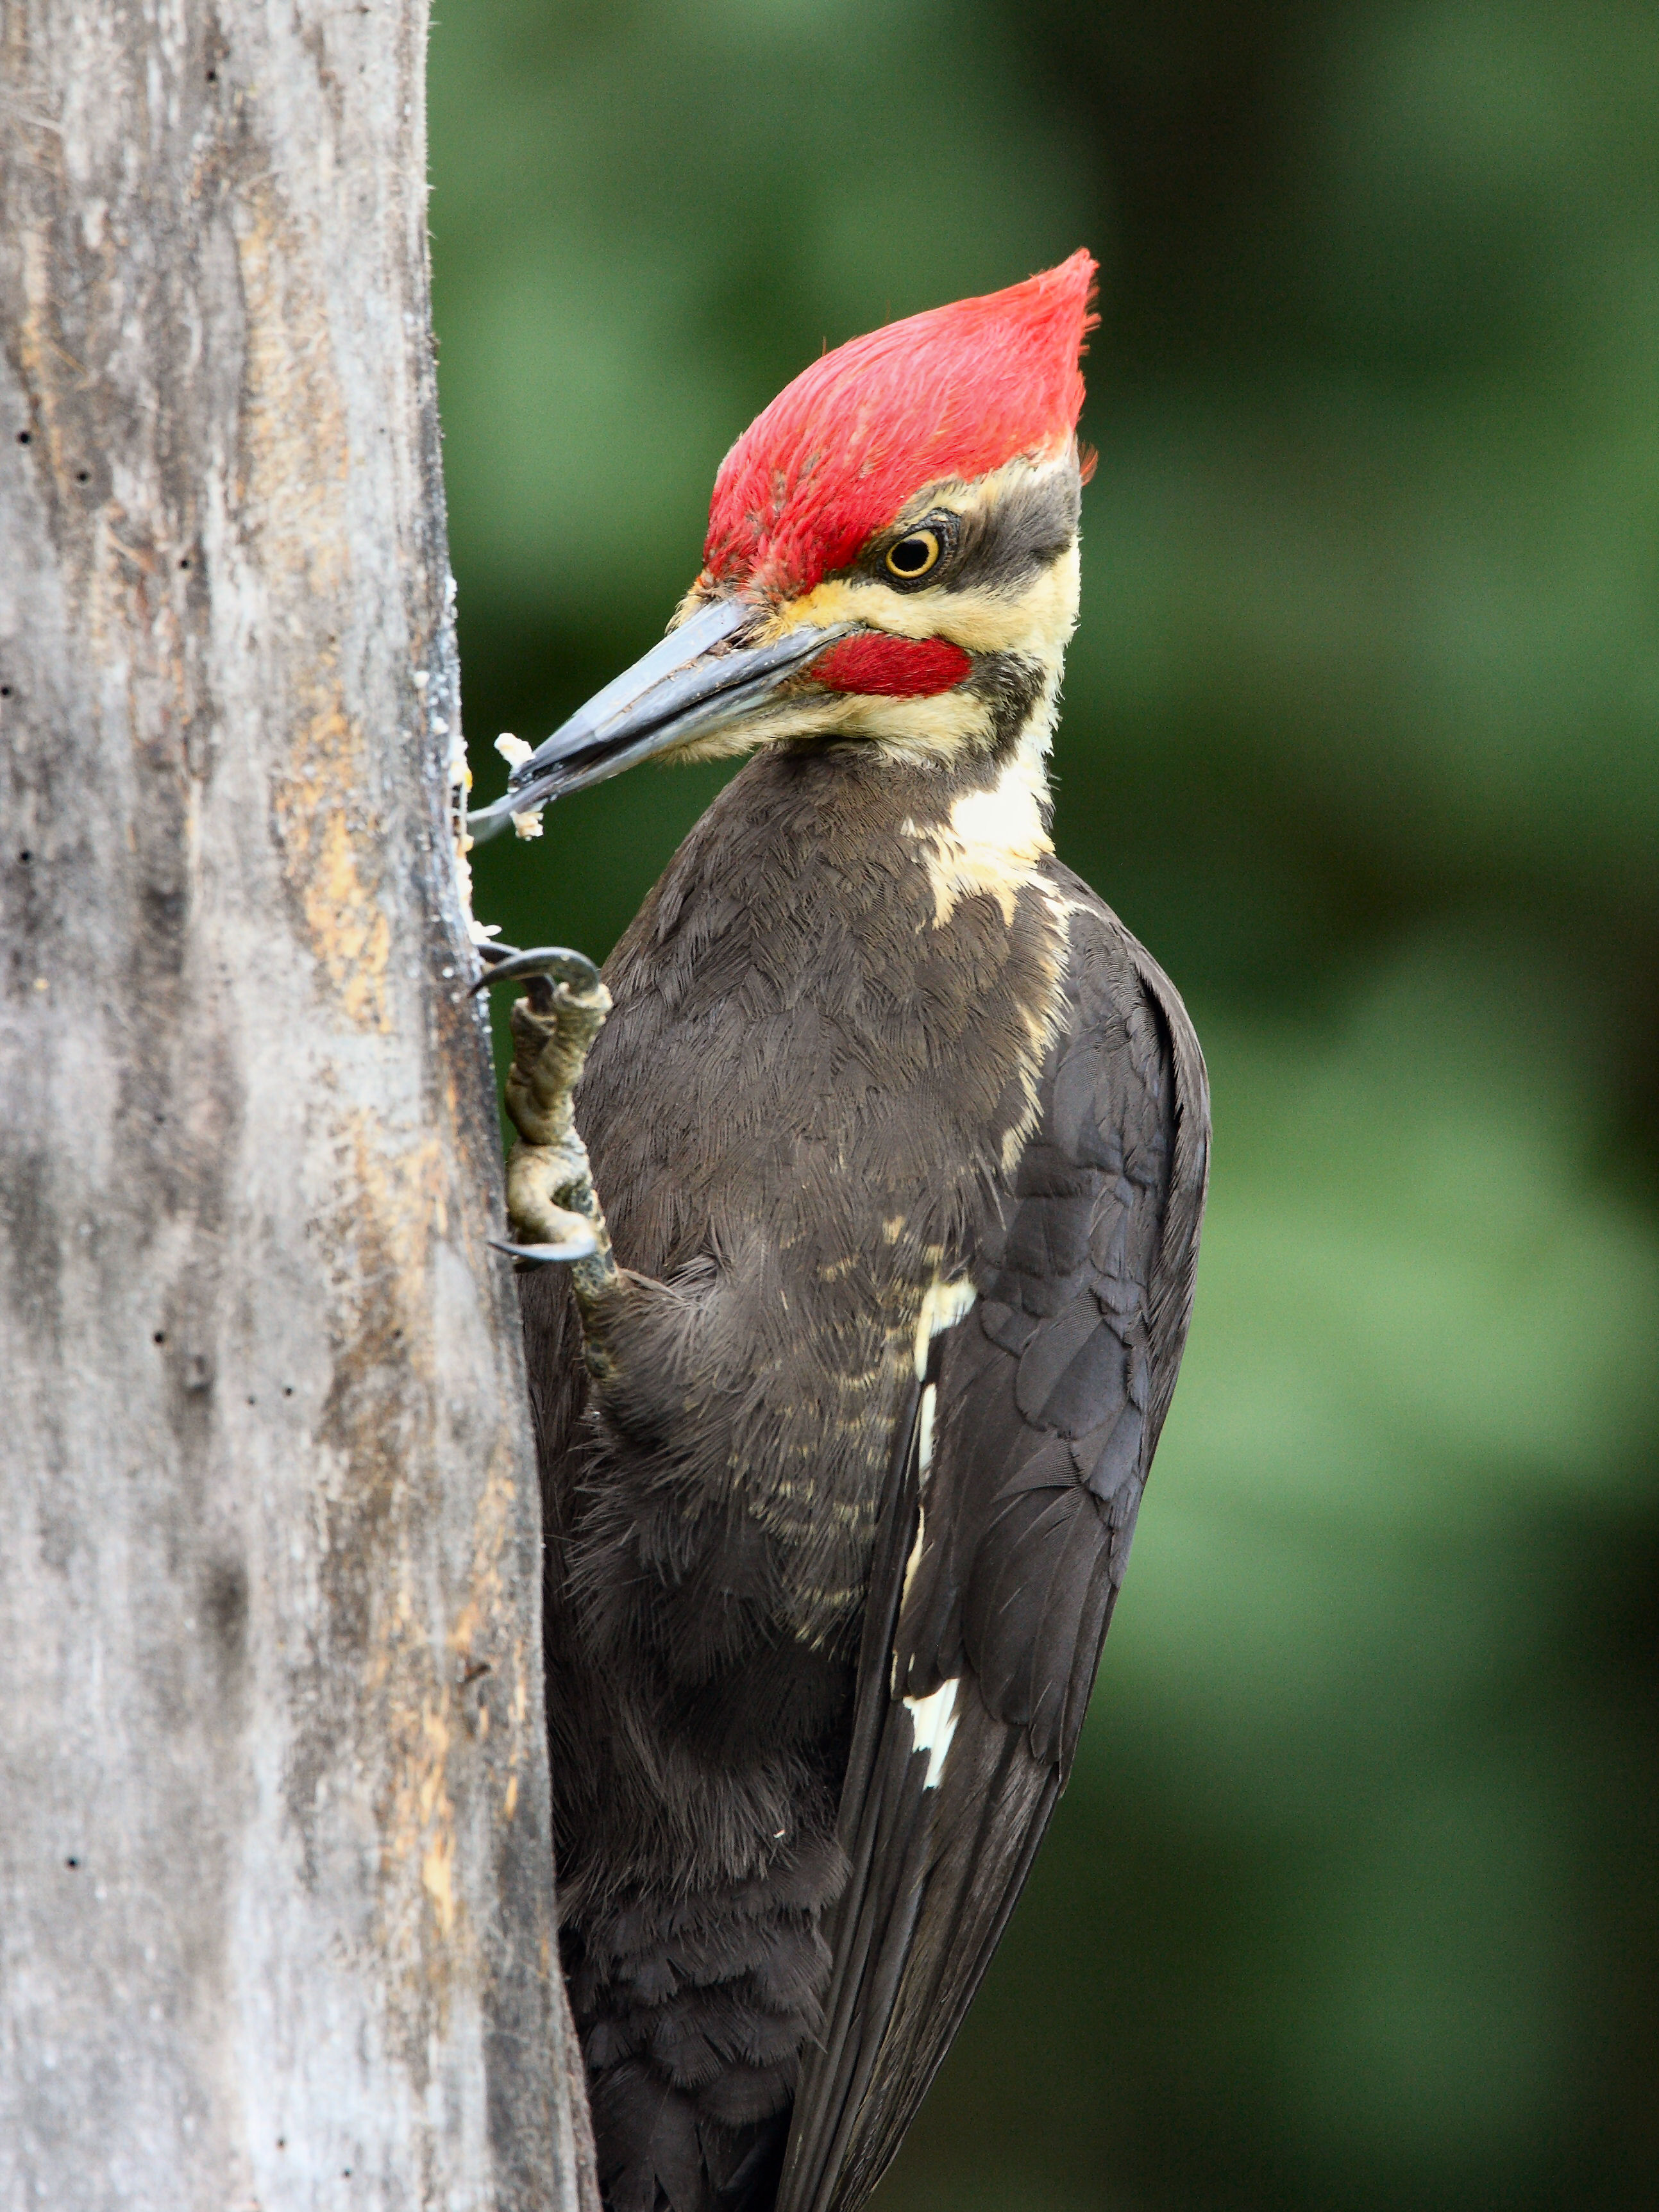 How to deal with problem Woodpecker in New York | WildlifeHelp.org